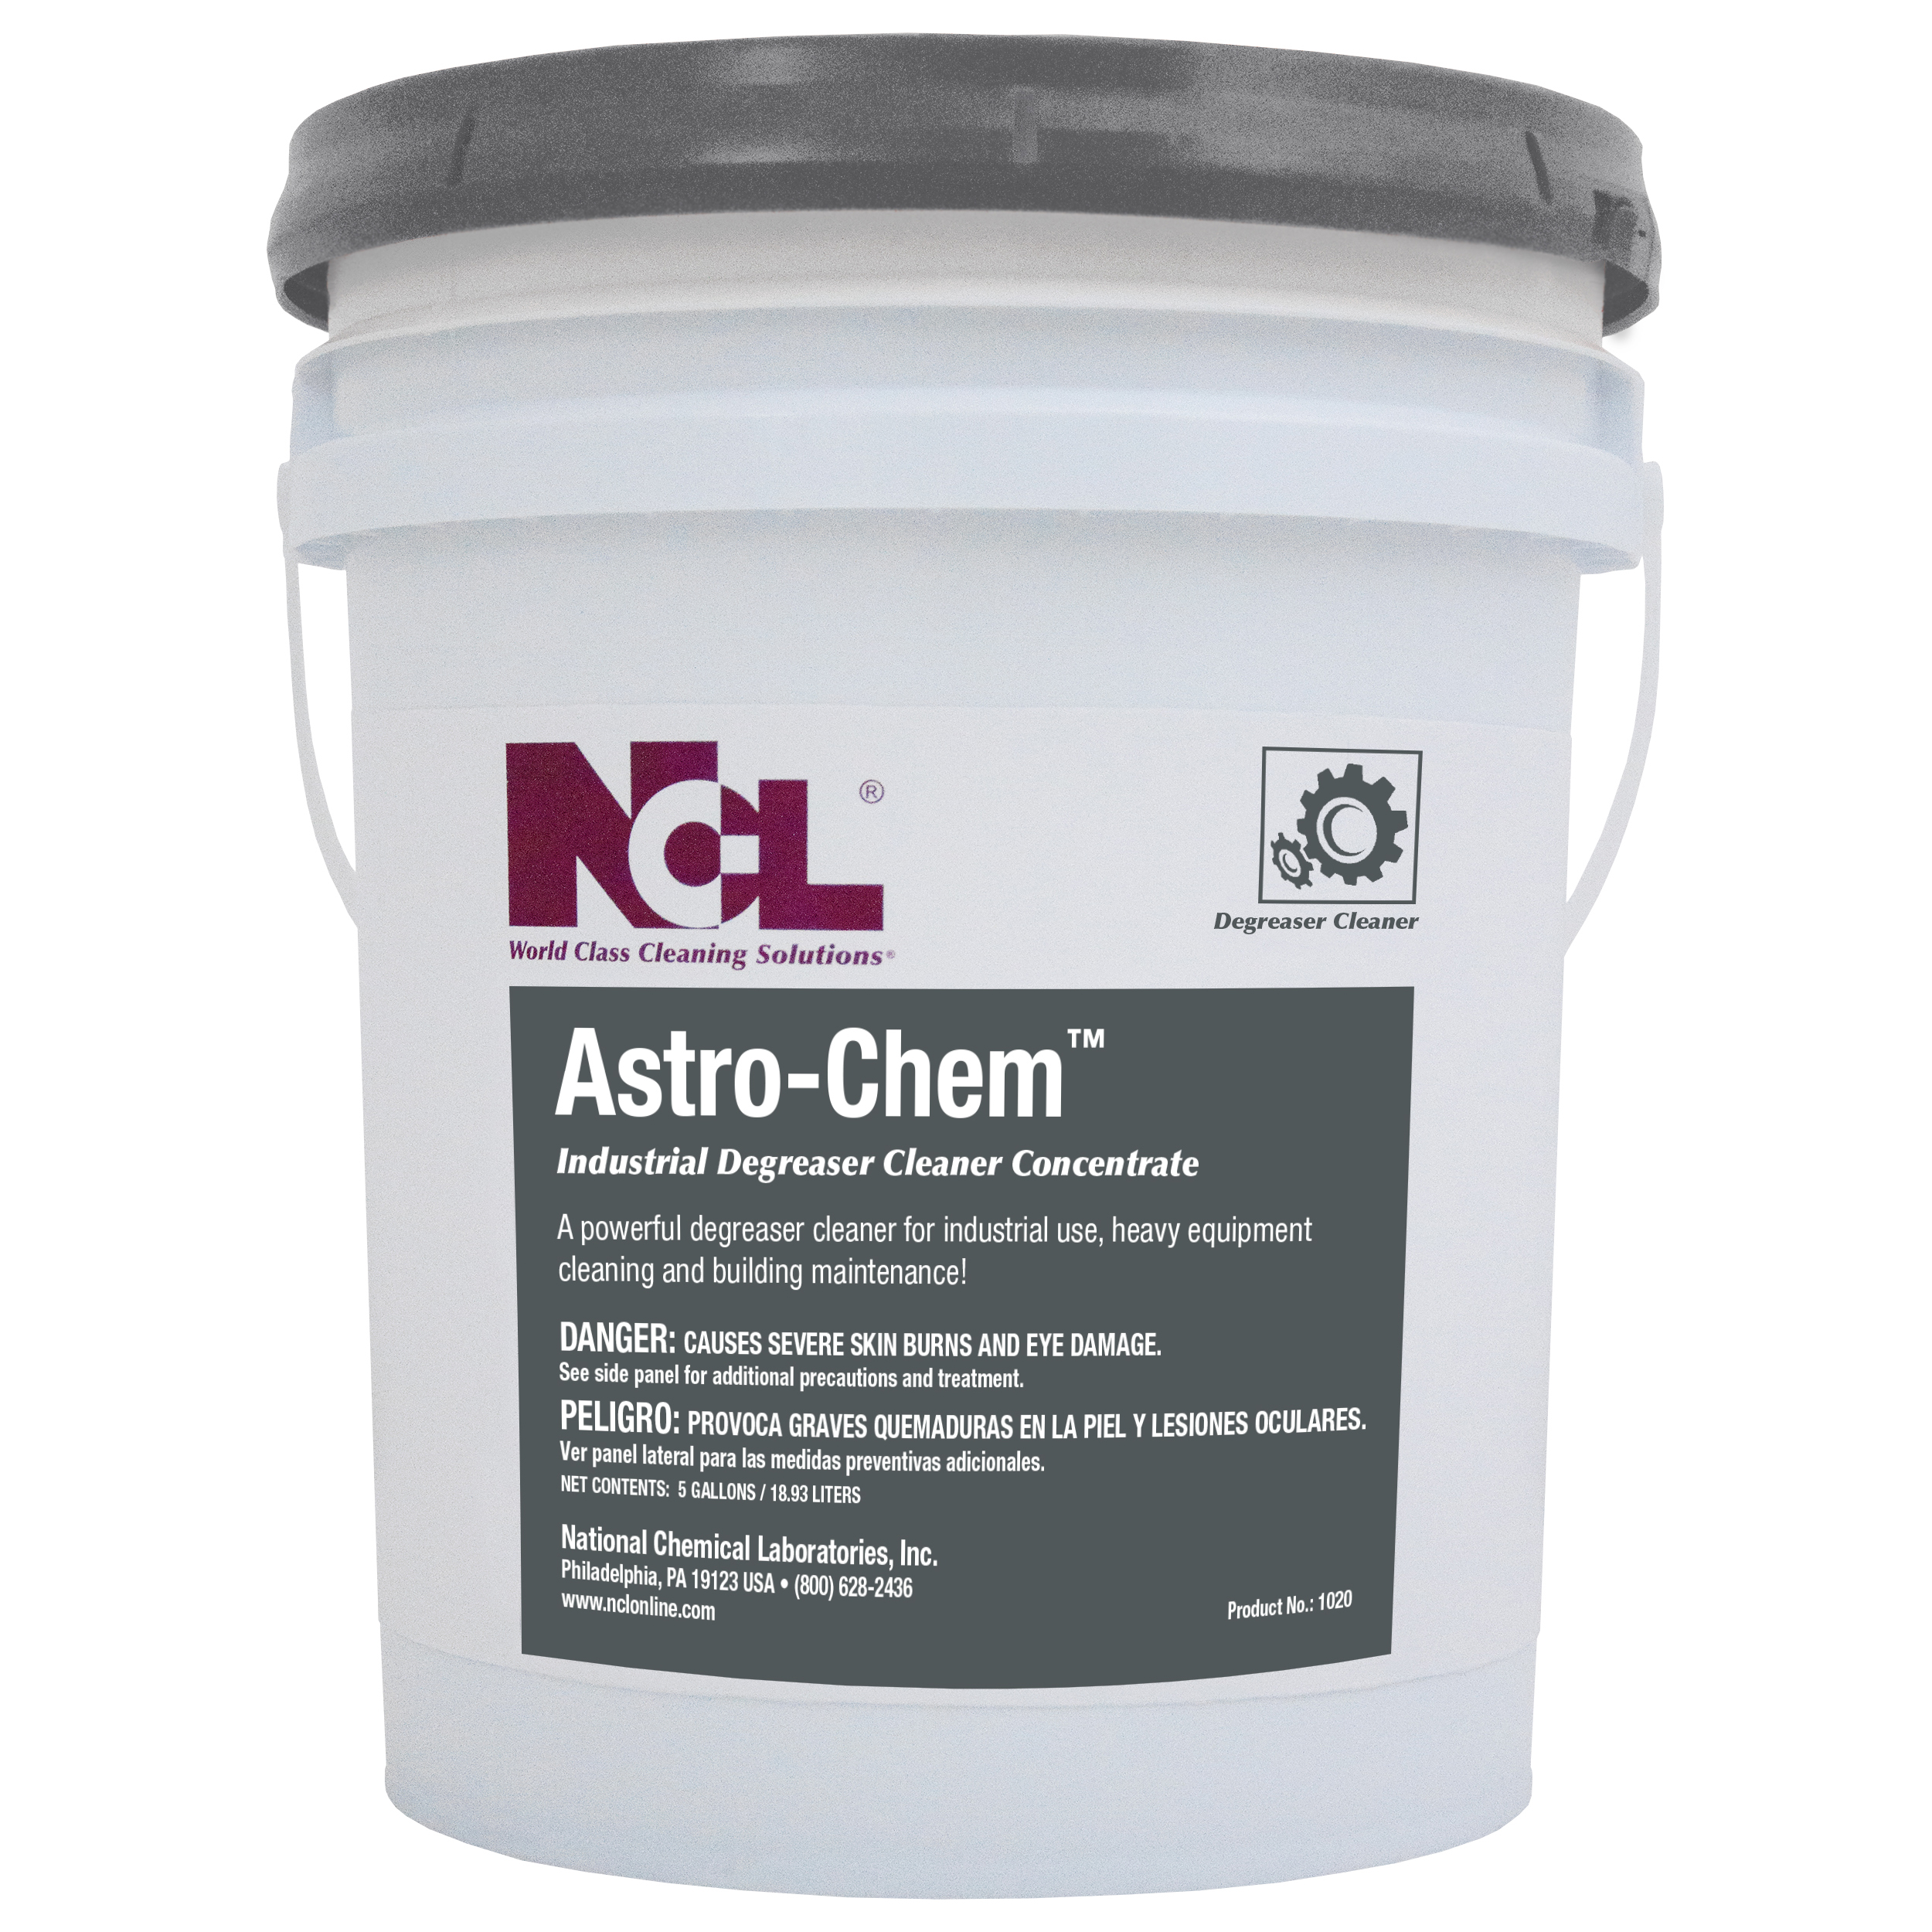  ASTRO-CHEM Industrial Degreaser Cleaner Concentrate 5 Gal. Pail (NCL1020-20) 